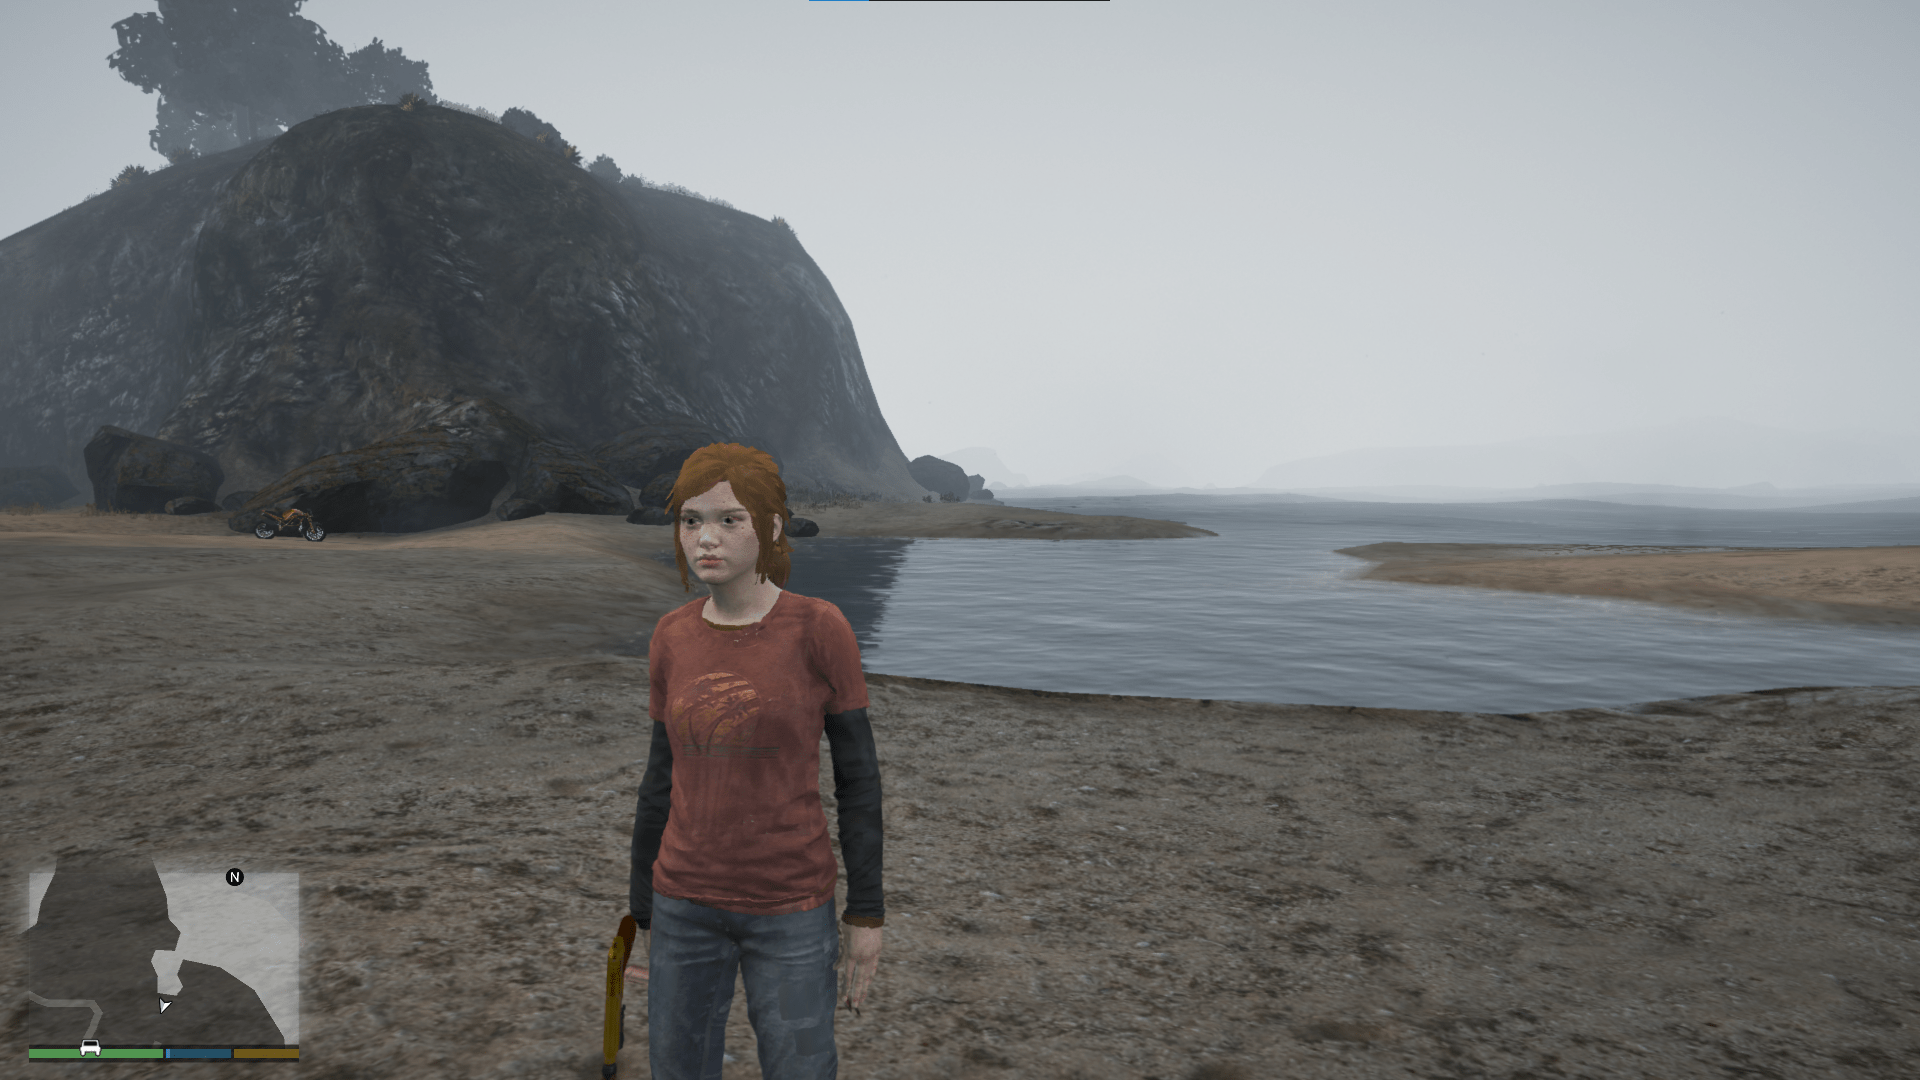 Download Tess from The Last Of Us for GTA 5